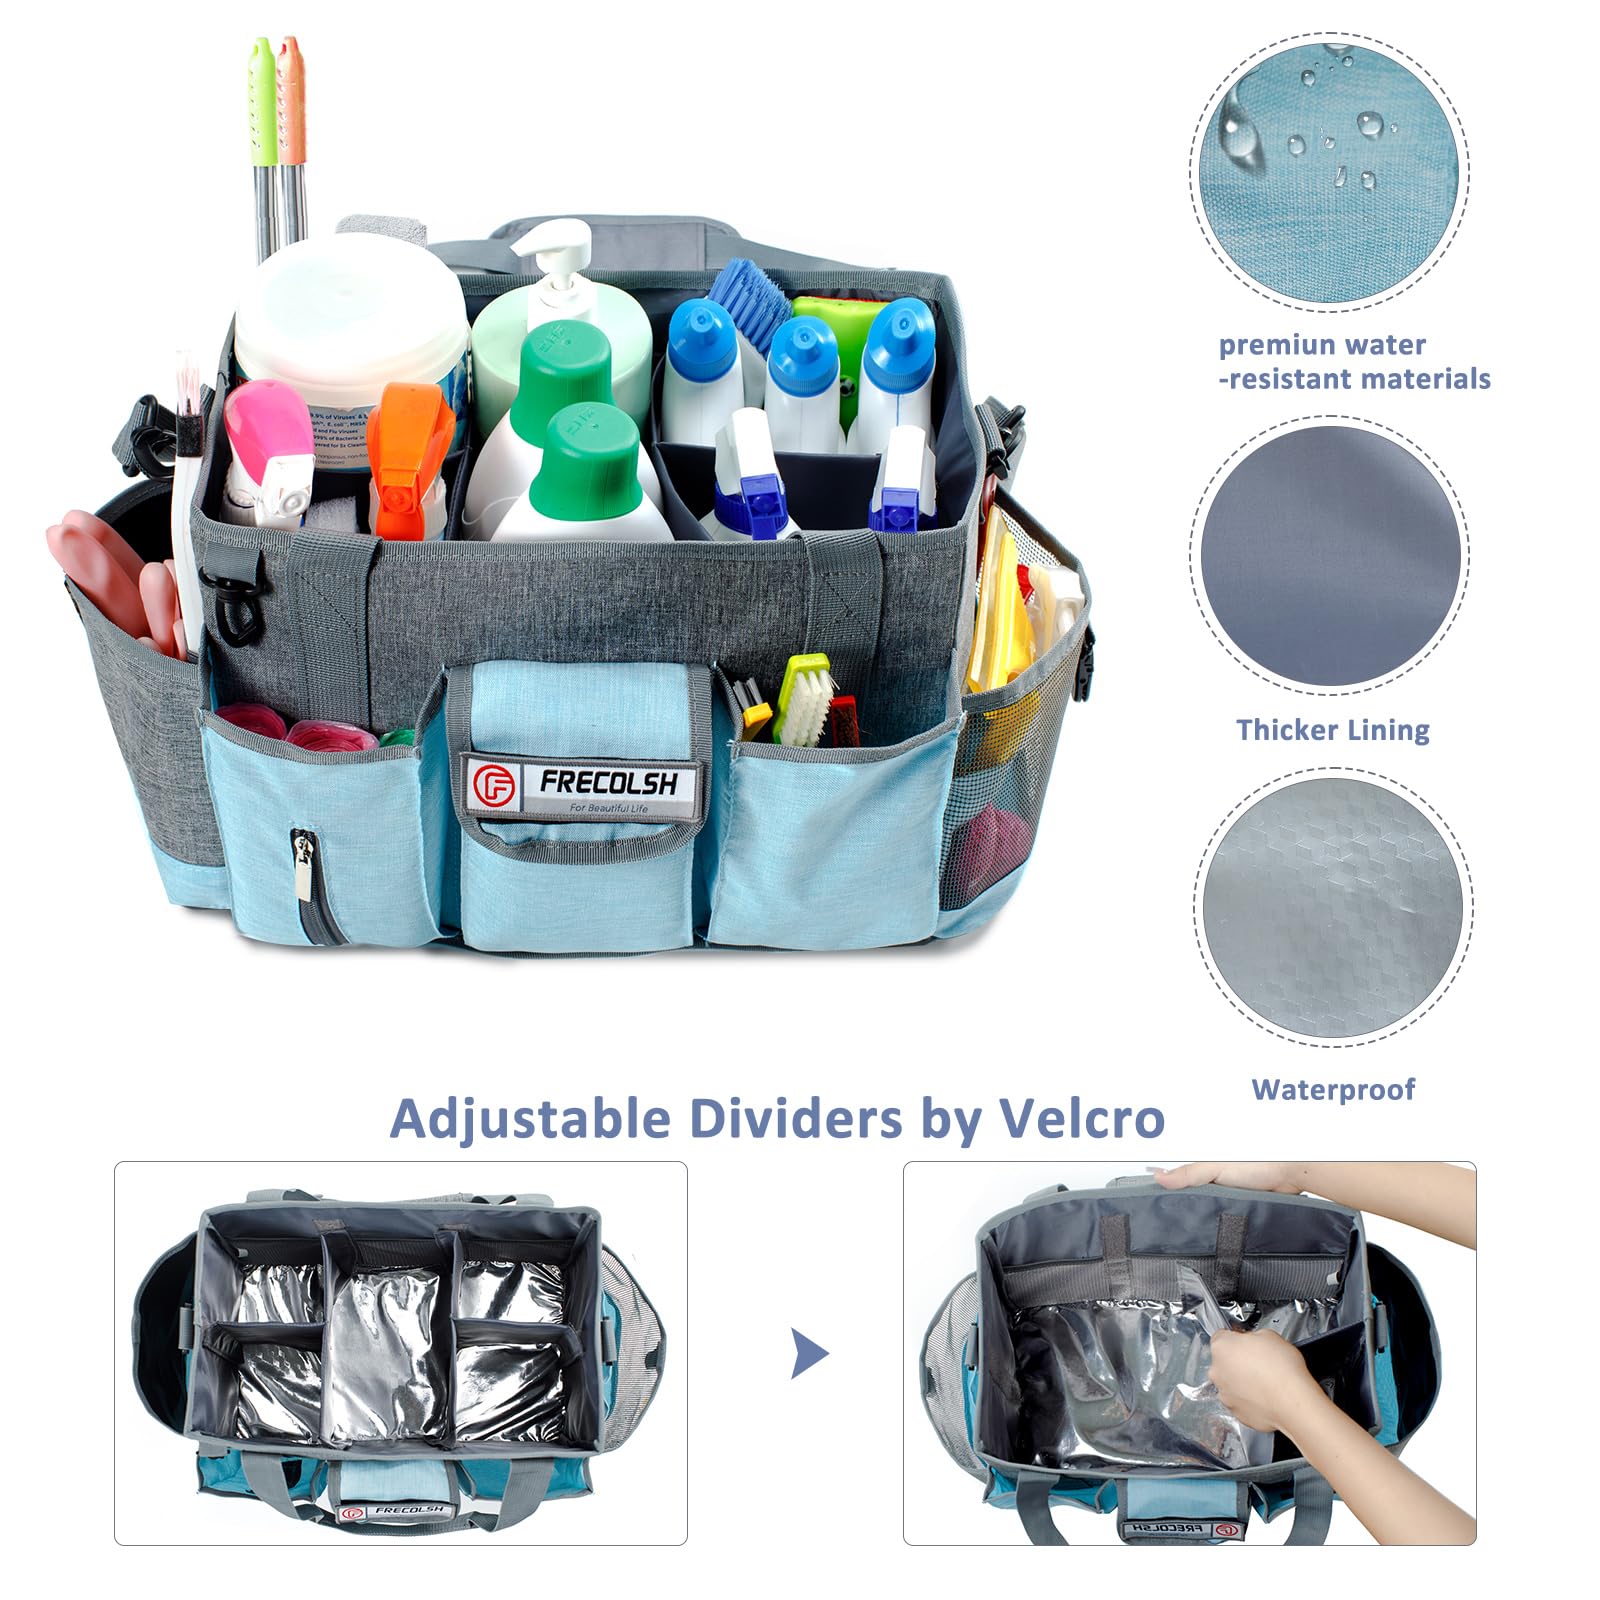 FRECOLSH Grey-Blue Cleaning Caddy, Oxford Polyester, Adjustable 5 Compartments, Padded Carry Handle, Waterproof Interior, Ideal for Housekeeping and Cleaning Supplies